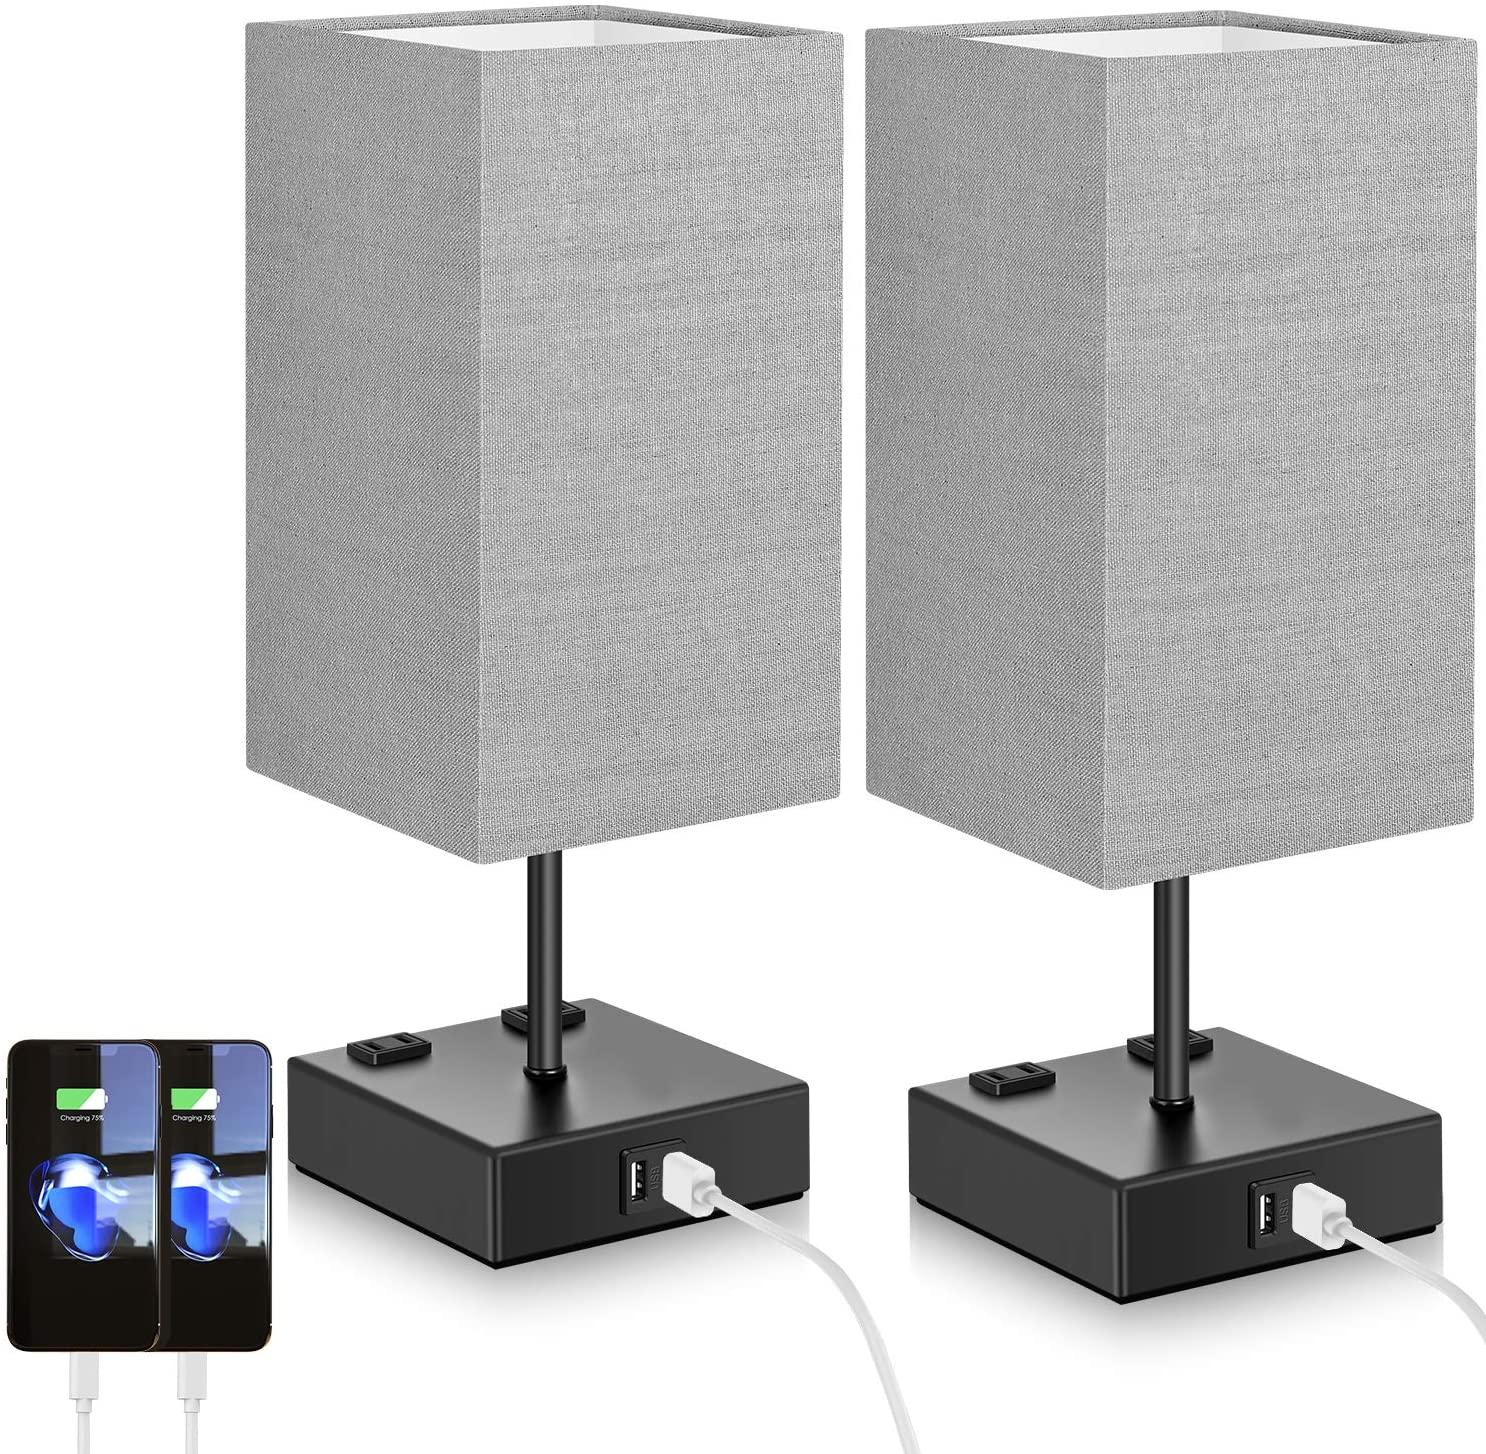 2 BesLowe 3-Way Dimmable Table Lamps for $32.99 Shipped